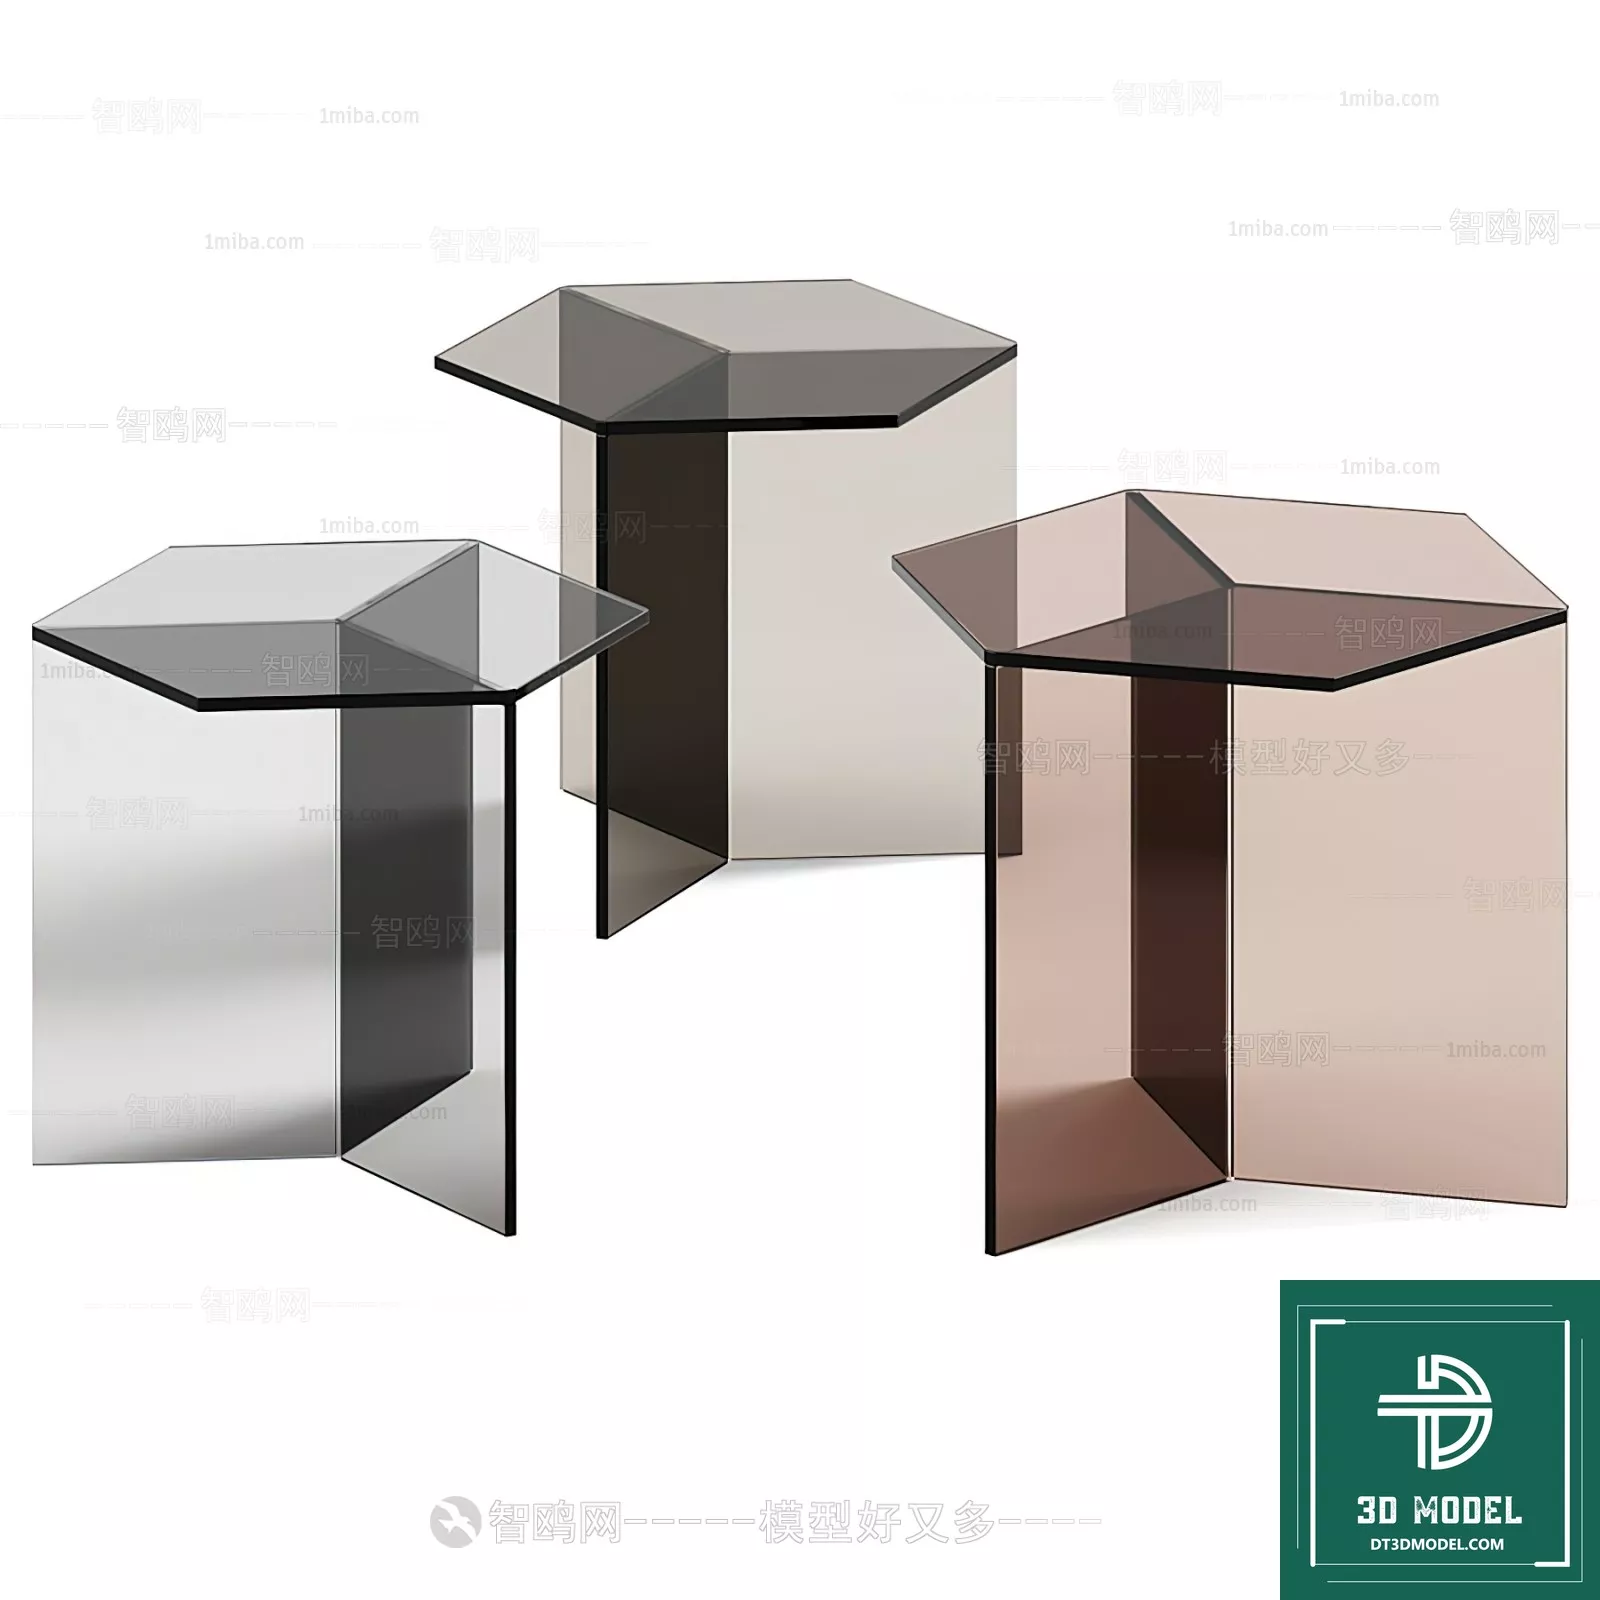 MODERN TEA TABLE - SKETCHUP 3D MODEL - VRAY OR ENSCAPE - ID14936